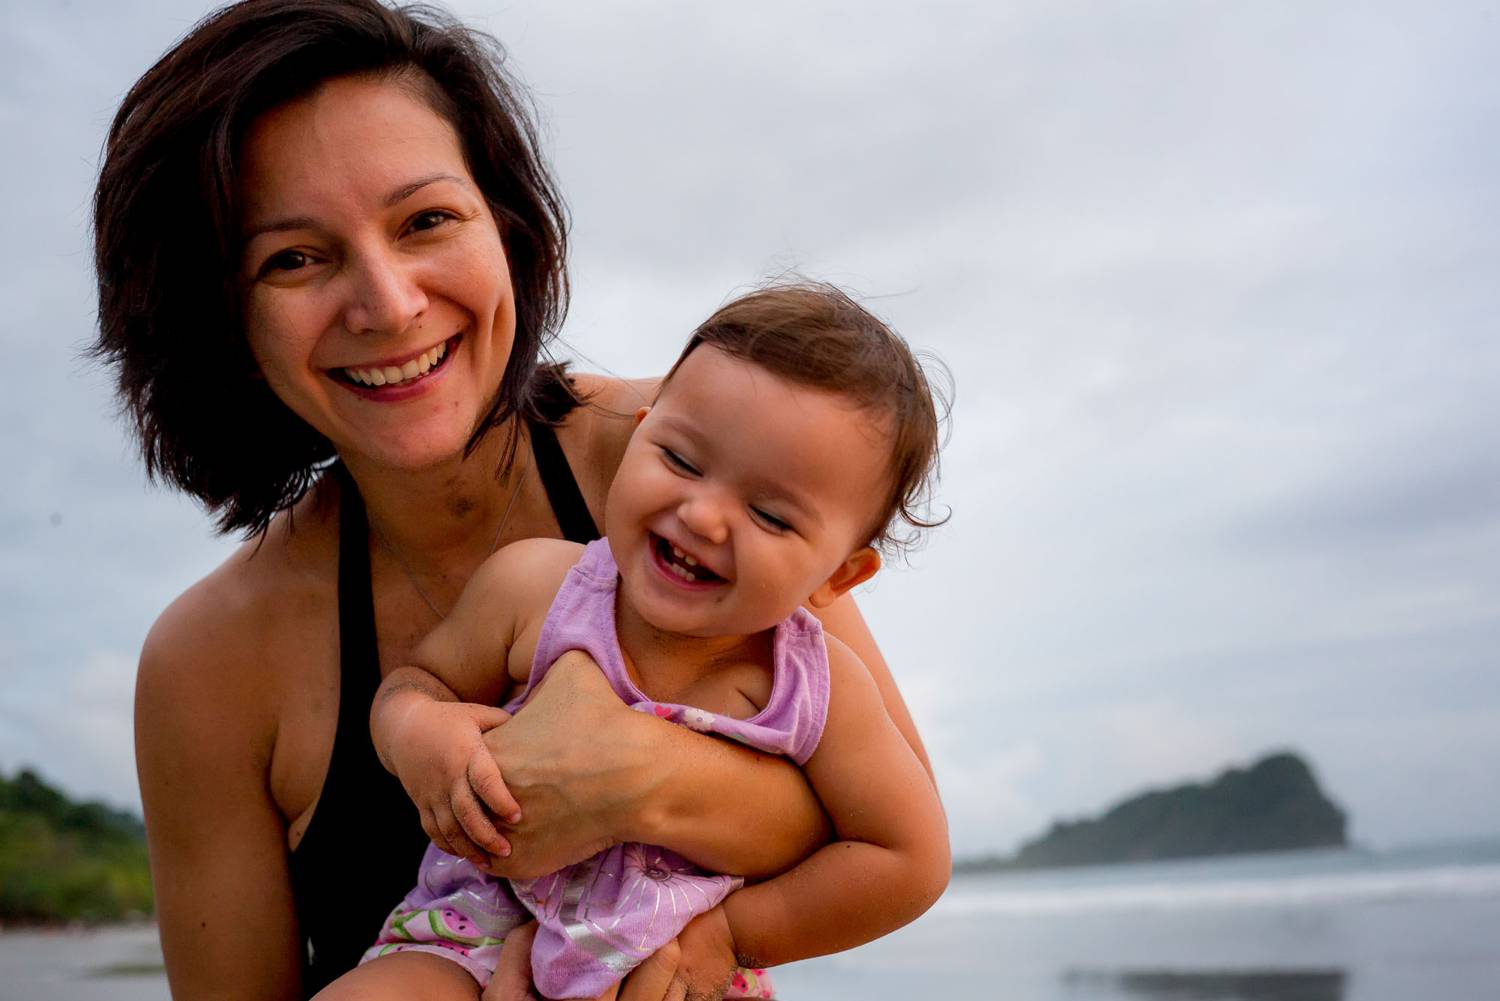 A photo by Kevin Heslin depicts a mom smiling with her laughing baby in her arms as they play on a beach.